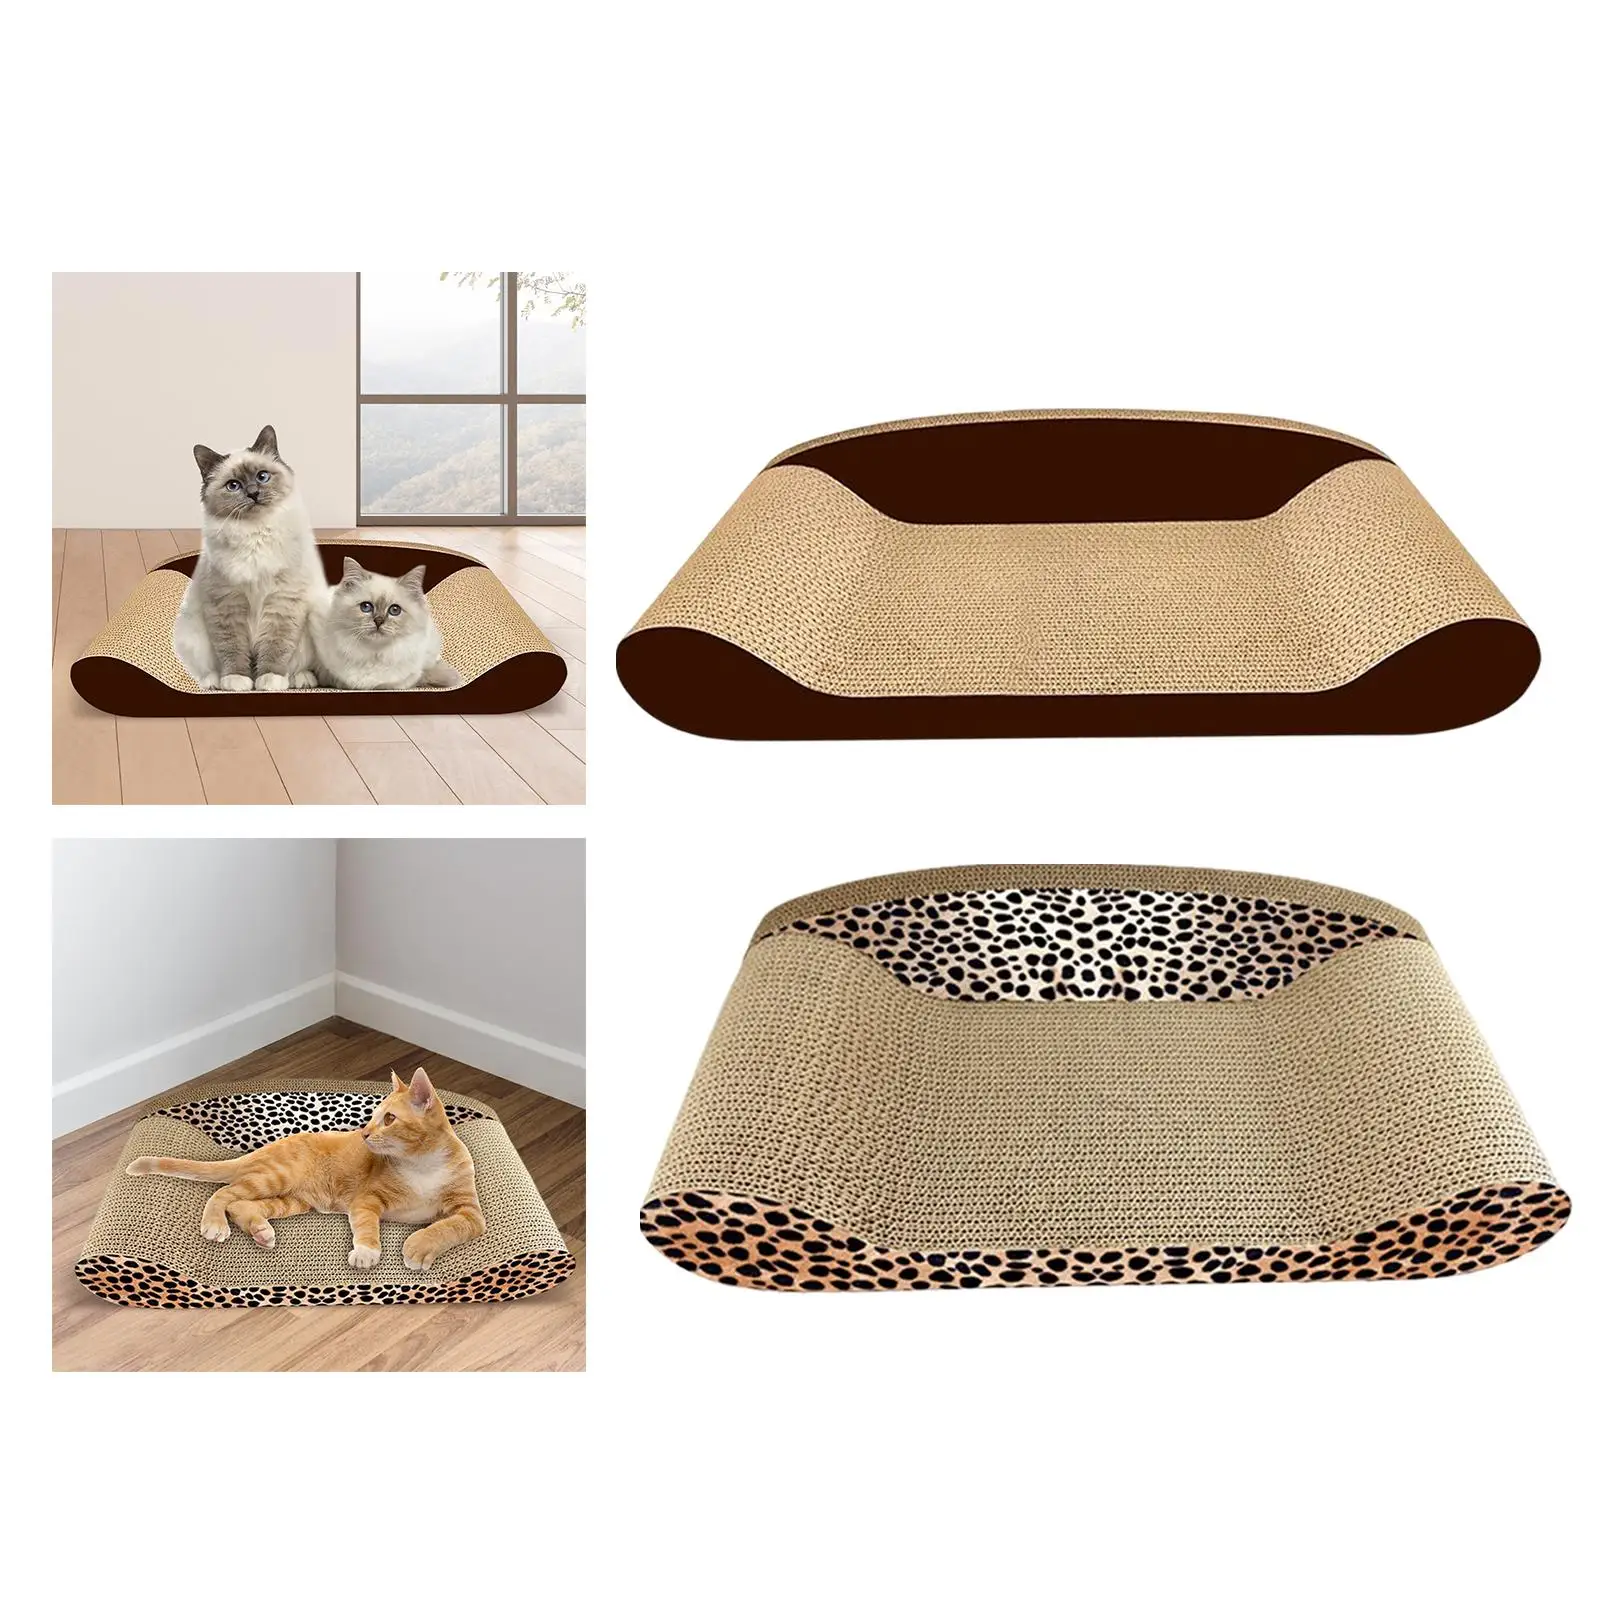 Pet Cat Scratcher Sofa Scratching Board Toy Sleeping Bed Grind Claws Cushion for Kitty Furniture Protector Pet Accessories